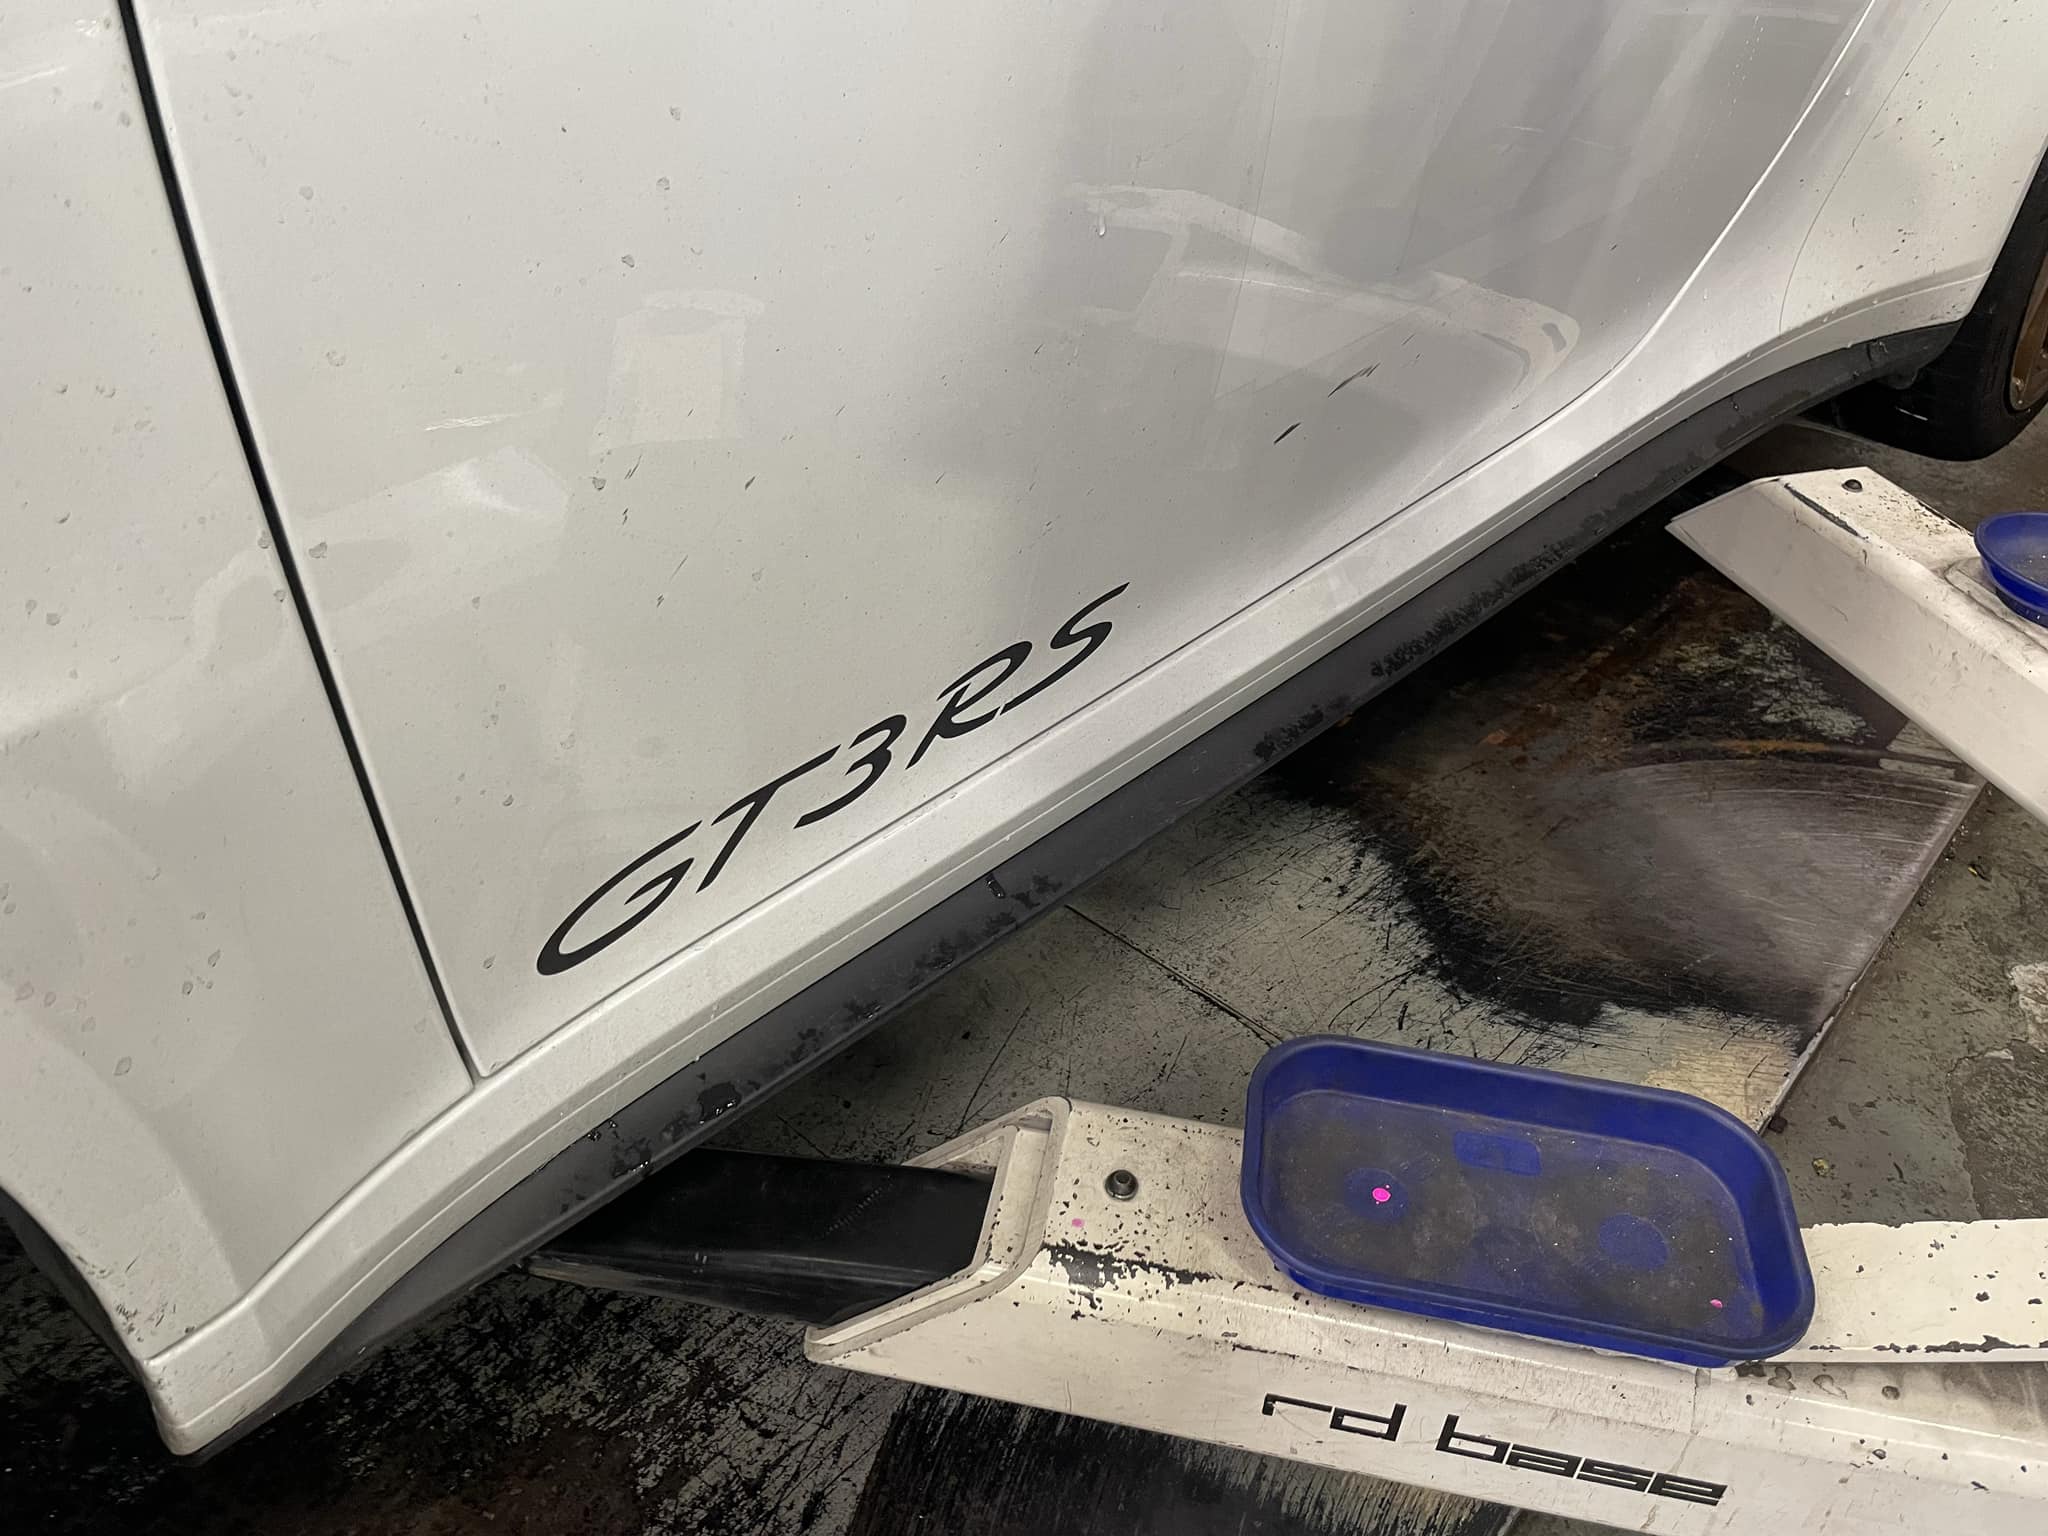 GT3RS 純正パーツ流用！